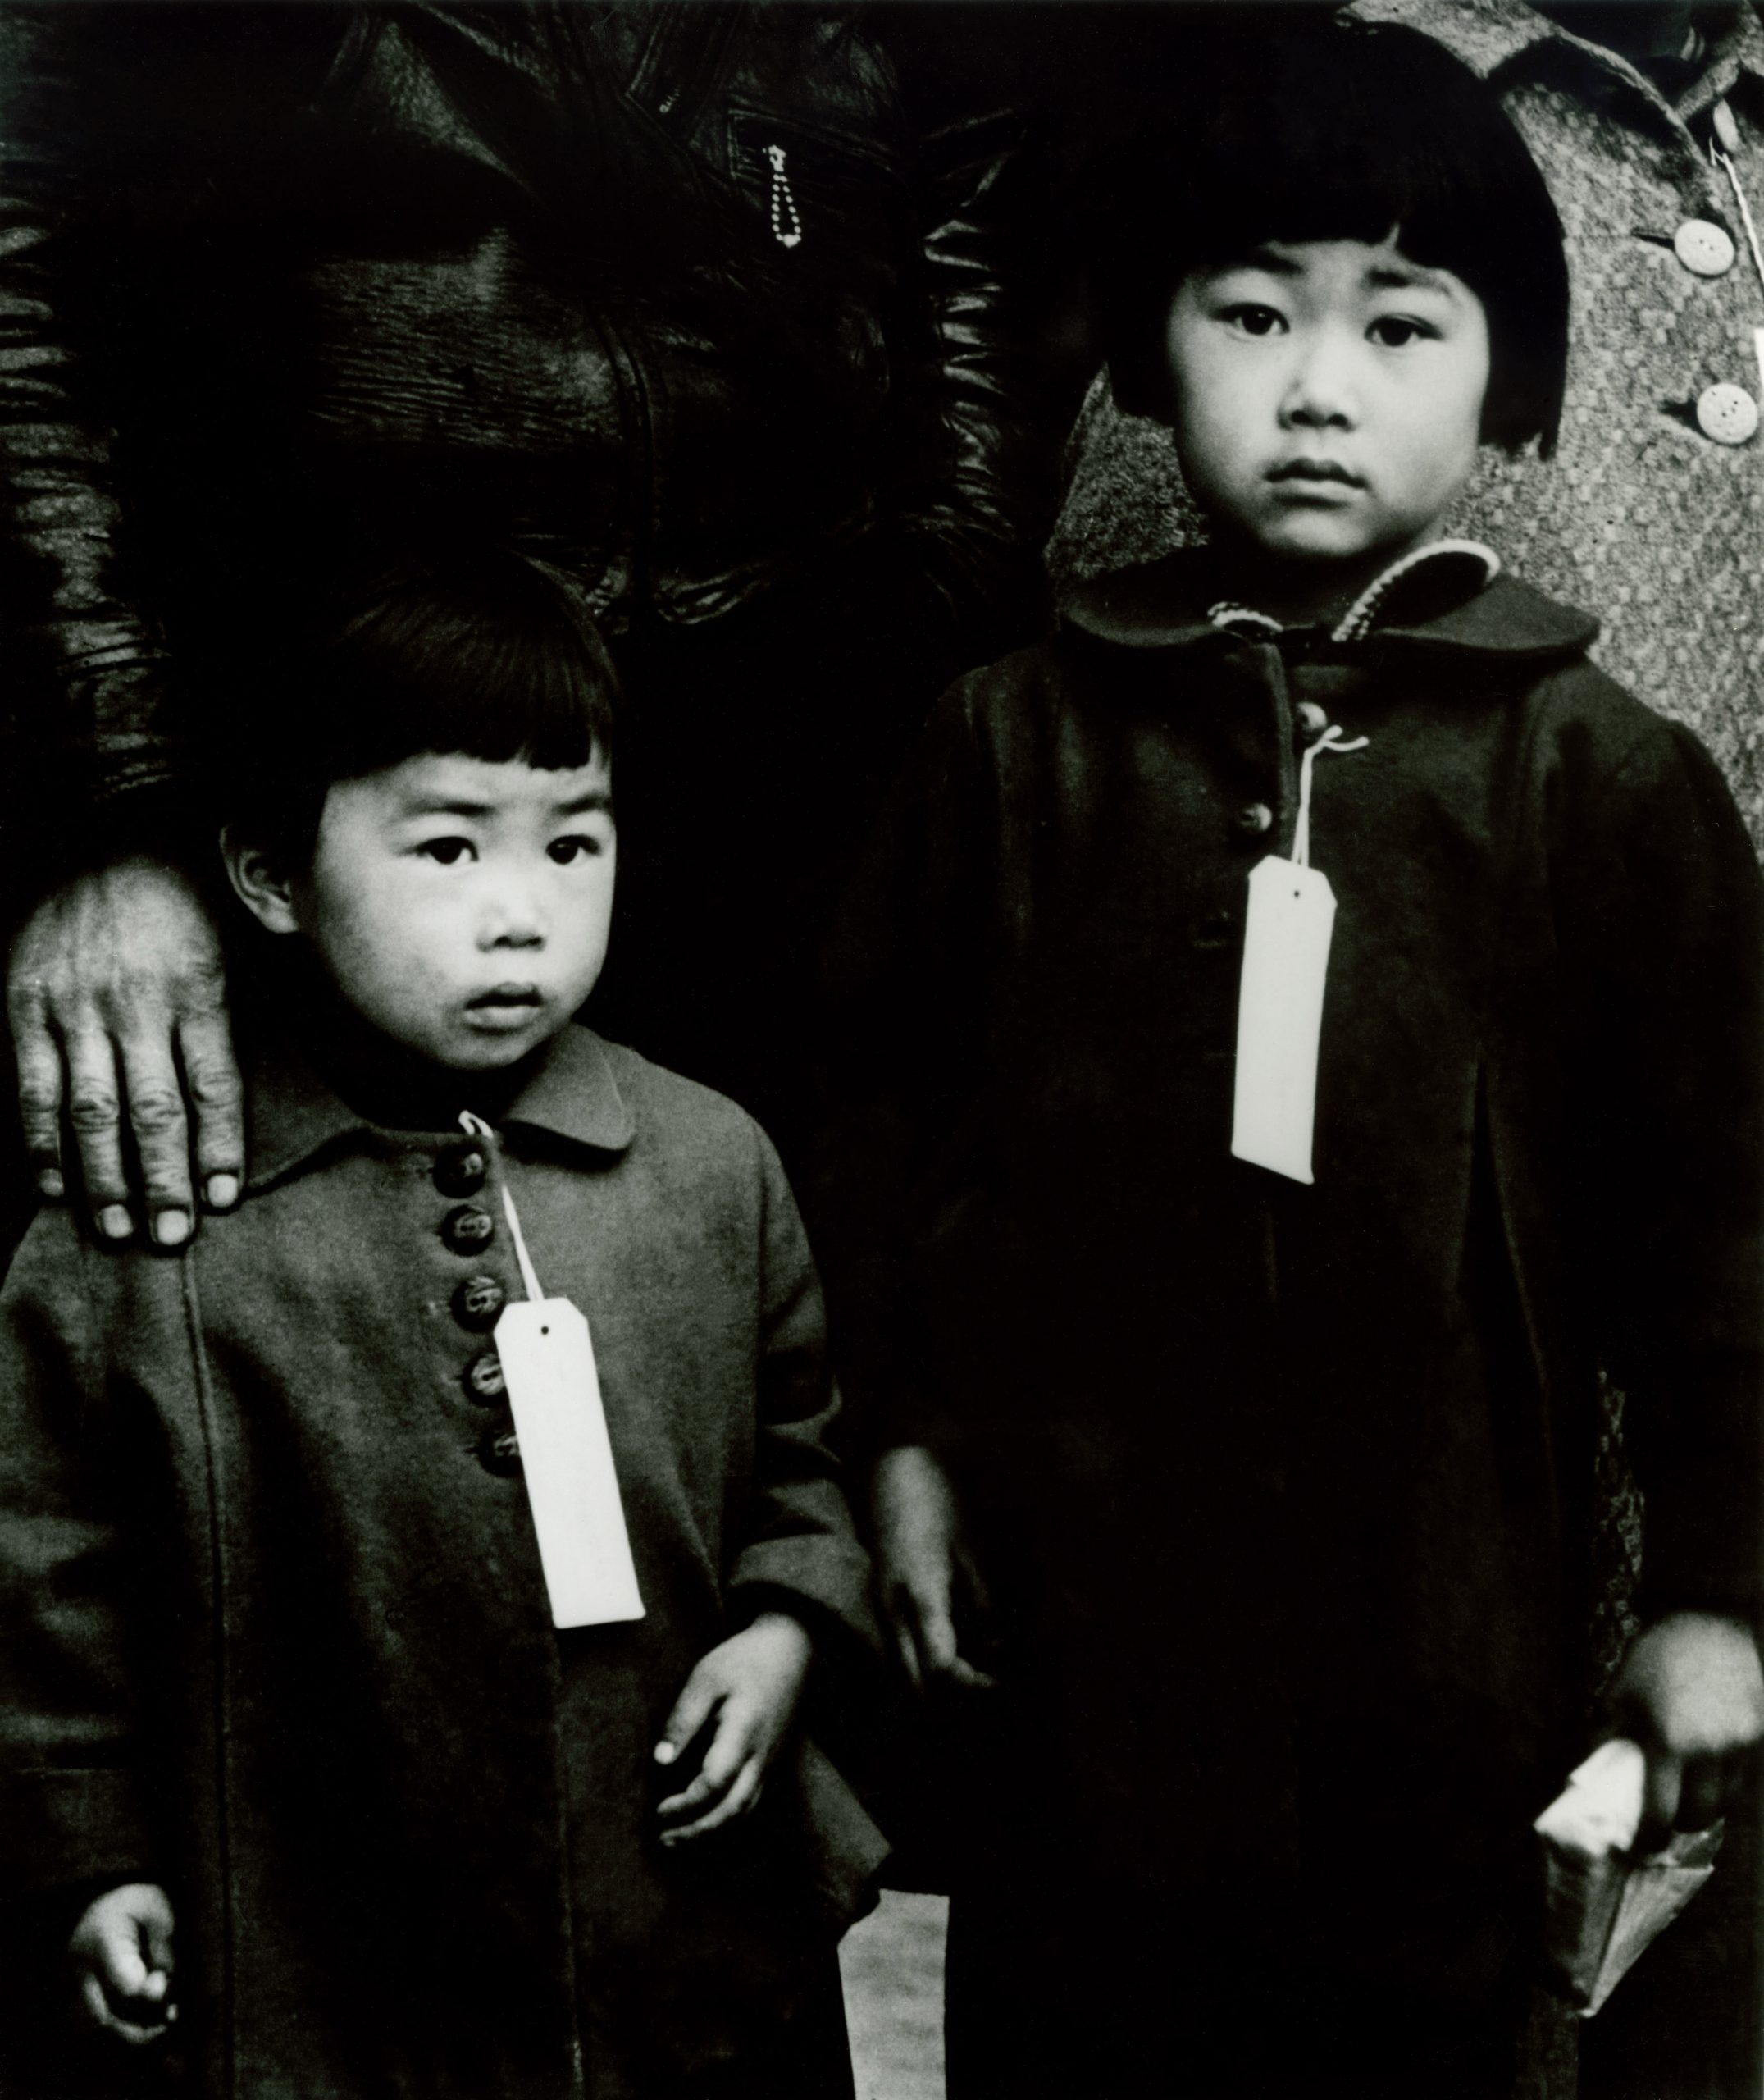 Enforcement of Executive Order 9066. Japanese children made to wear identification tags, Hayward, California, 1942